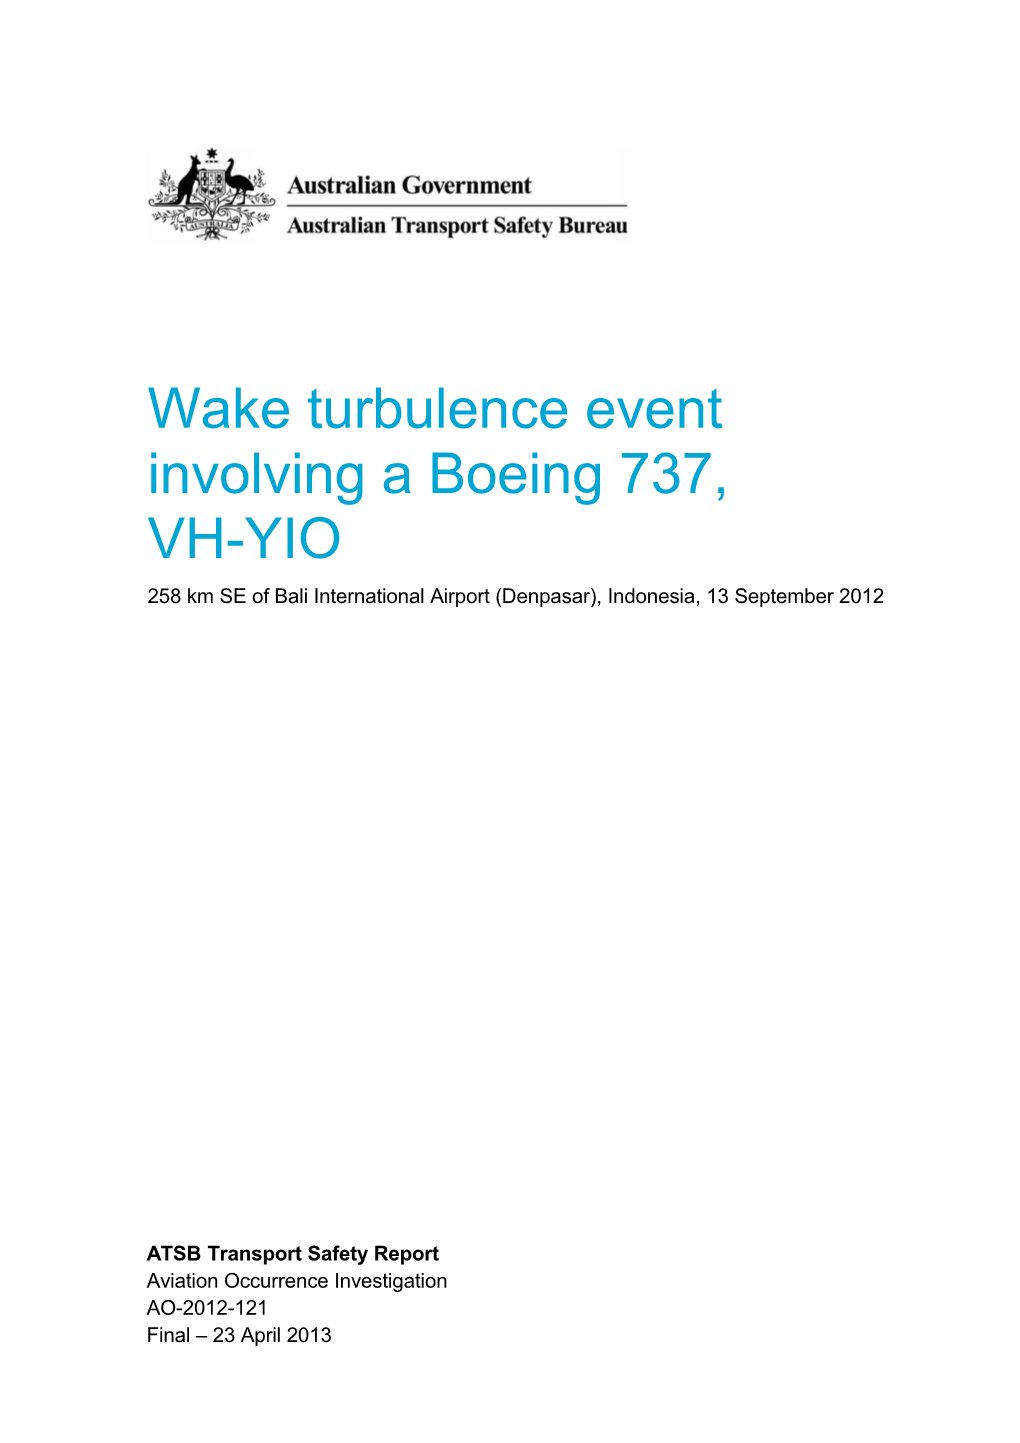 Wake Turbulence Event Involving a Boeing 737, VHYIO